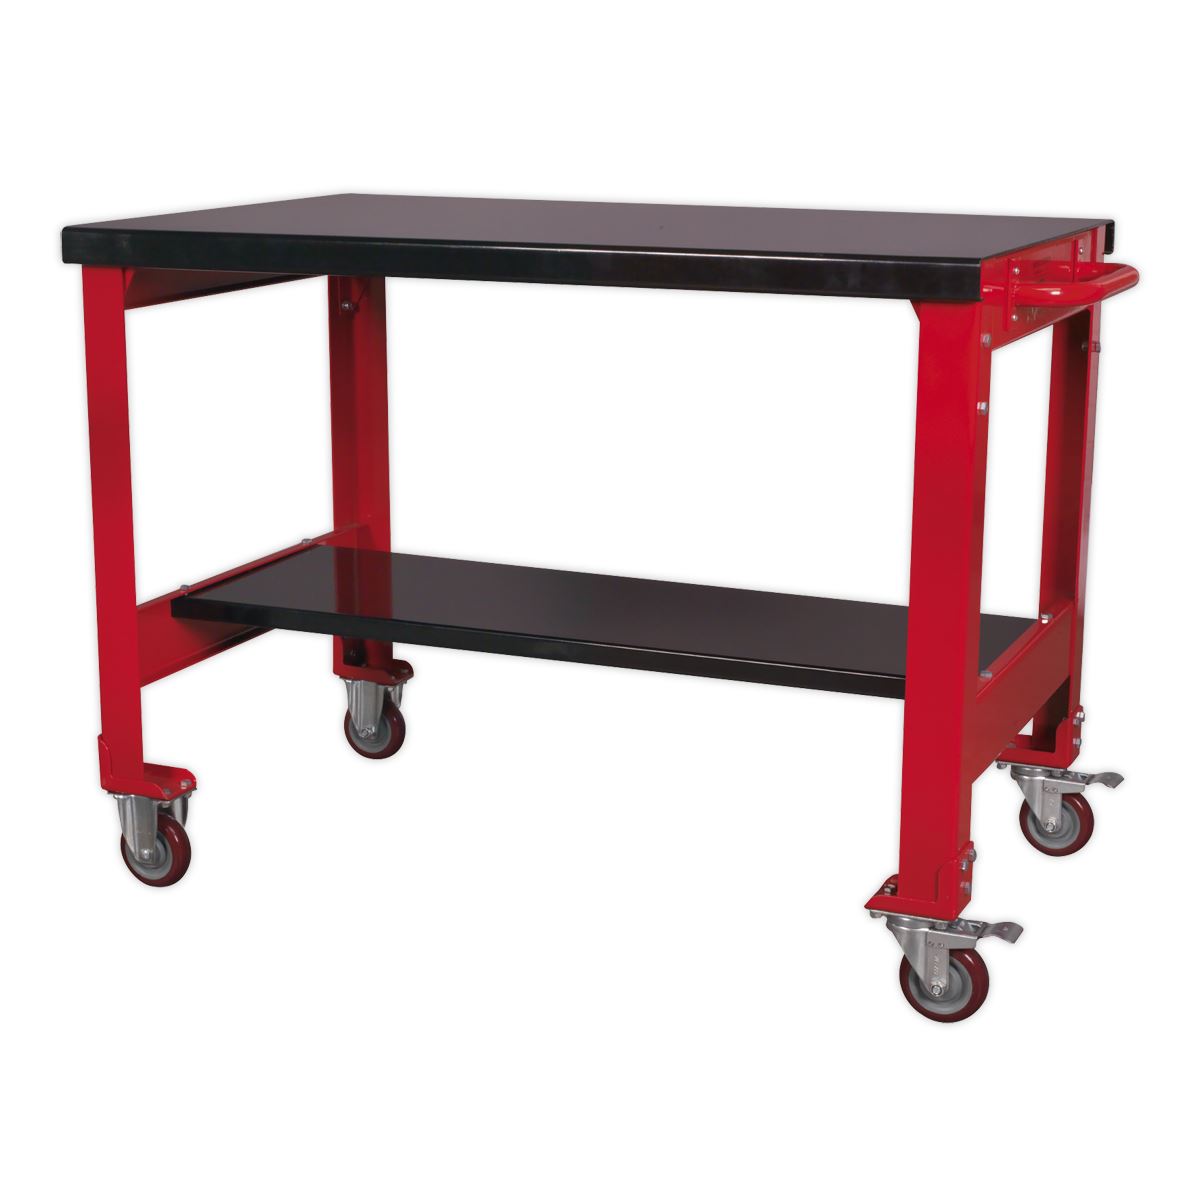 Sealey Mobile Workbench 2-Level